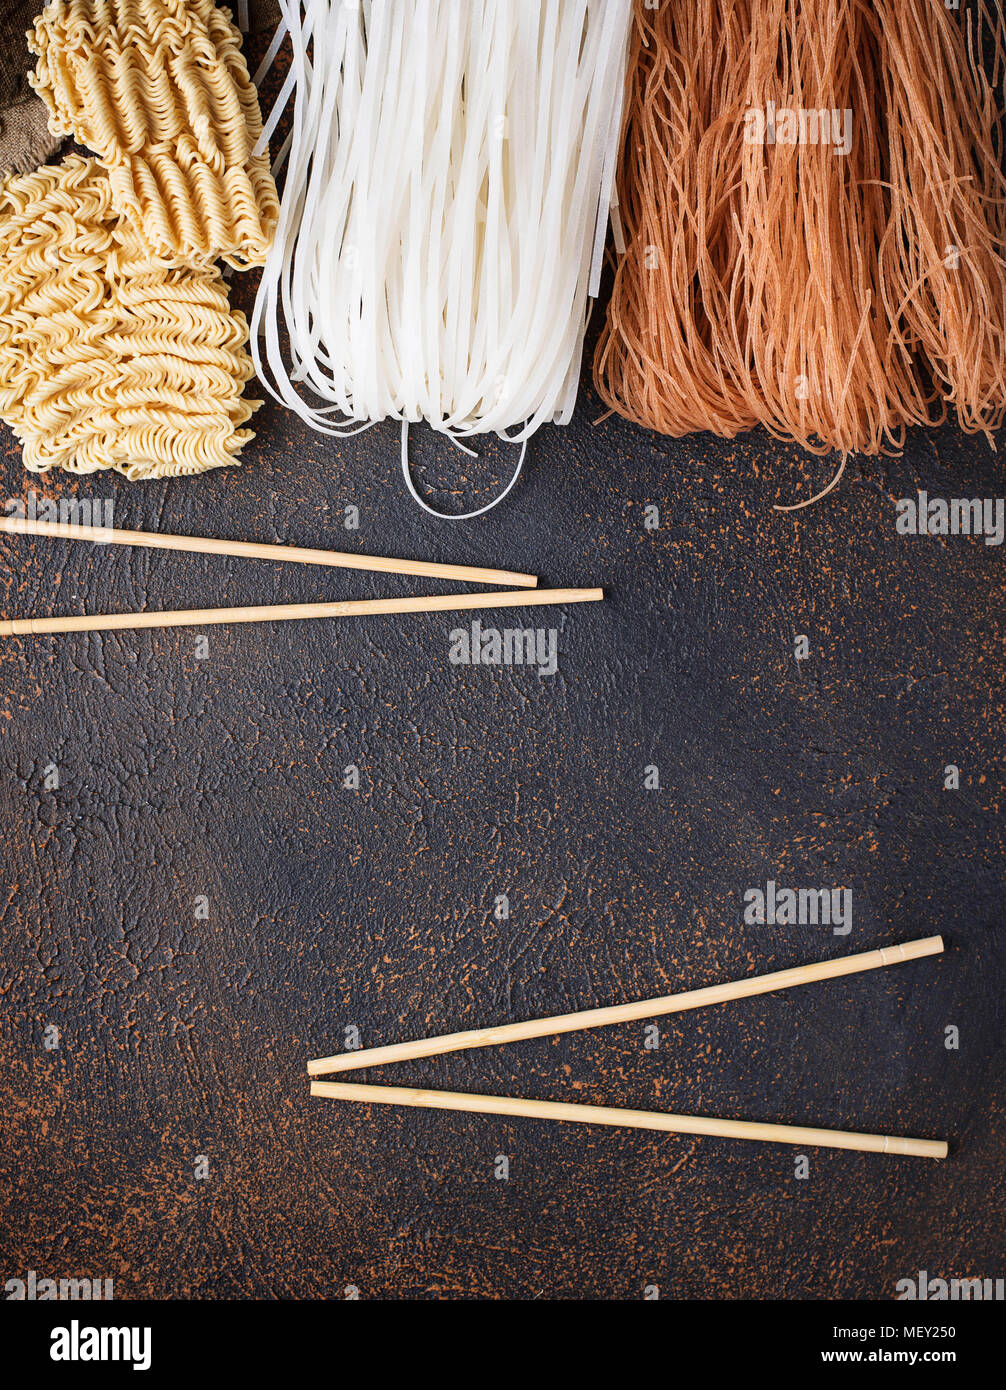 Different Asian rice noodles on rusty background Stock Photo